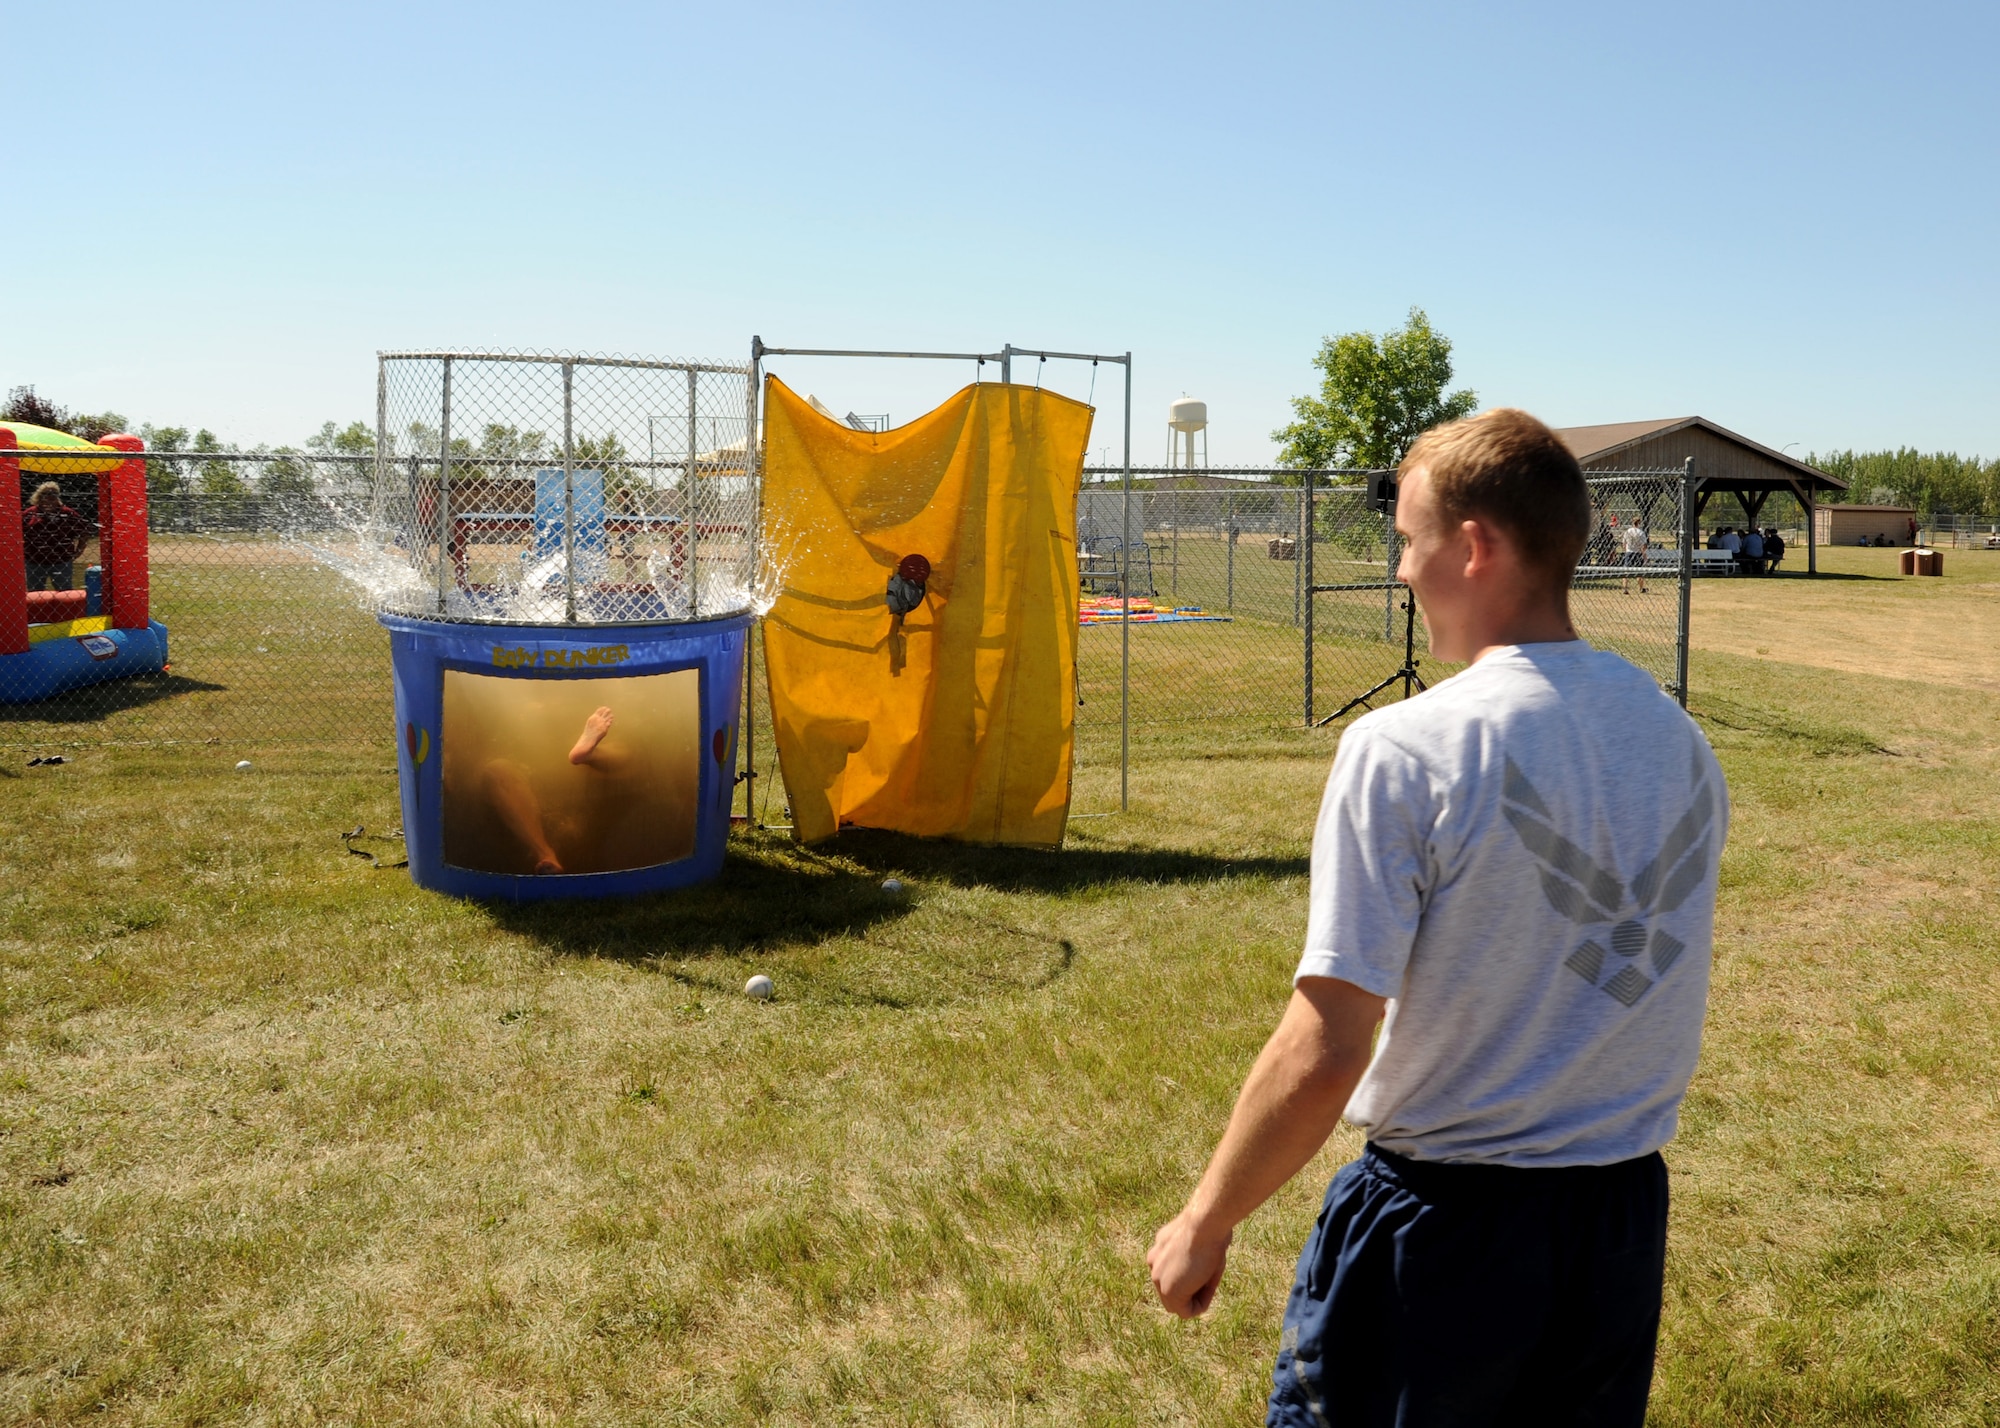 Airman 1st Class Levi Jackson, 319th Comptroller Squadron financial customer service technician, right, celebrates a successful throw at the dunk tank target August 20, 2105, on Grand Forks Air Force Base, North Dakota. The dunk tank at Summer Bash 2015 became the ?Duncan? Tank when Chief Master Sgt. David Duncan, 319th Air Base Wing command chief, volunteered to get dunked. The Airmen?s Activity Council provided the dunk tank for the event. (U.S. Air Force photo by Airman 1st Class Ryan Sparks/Released)